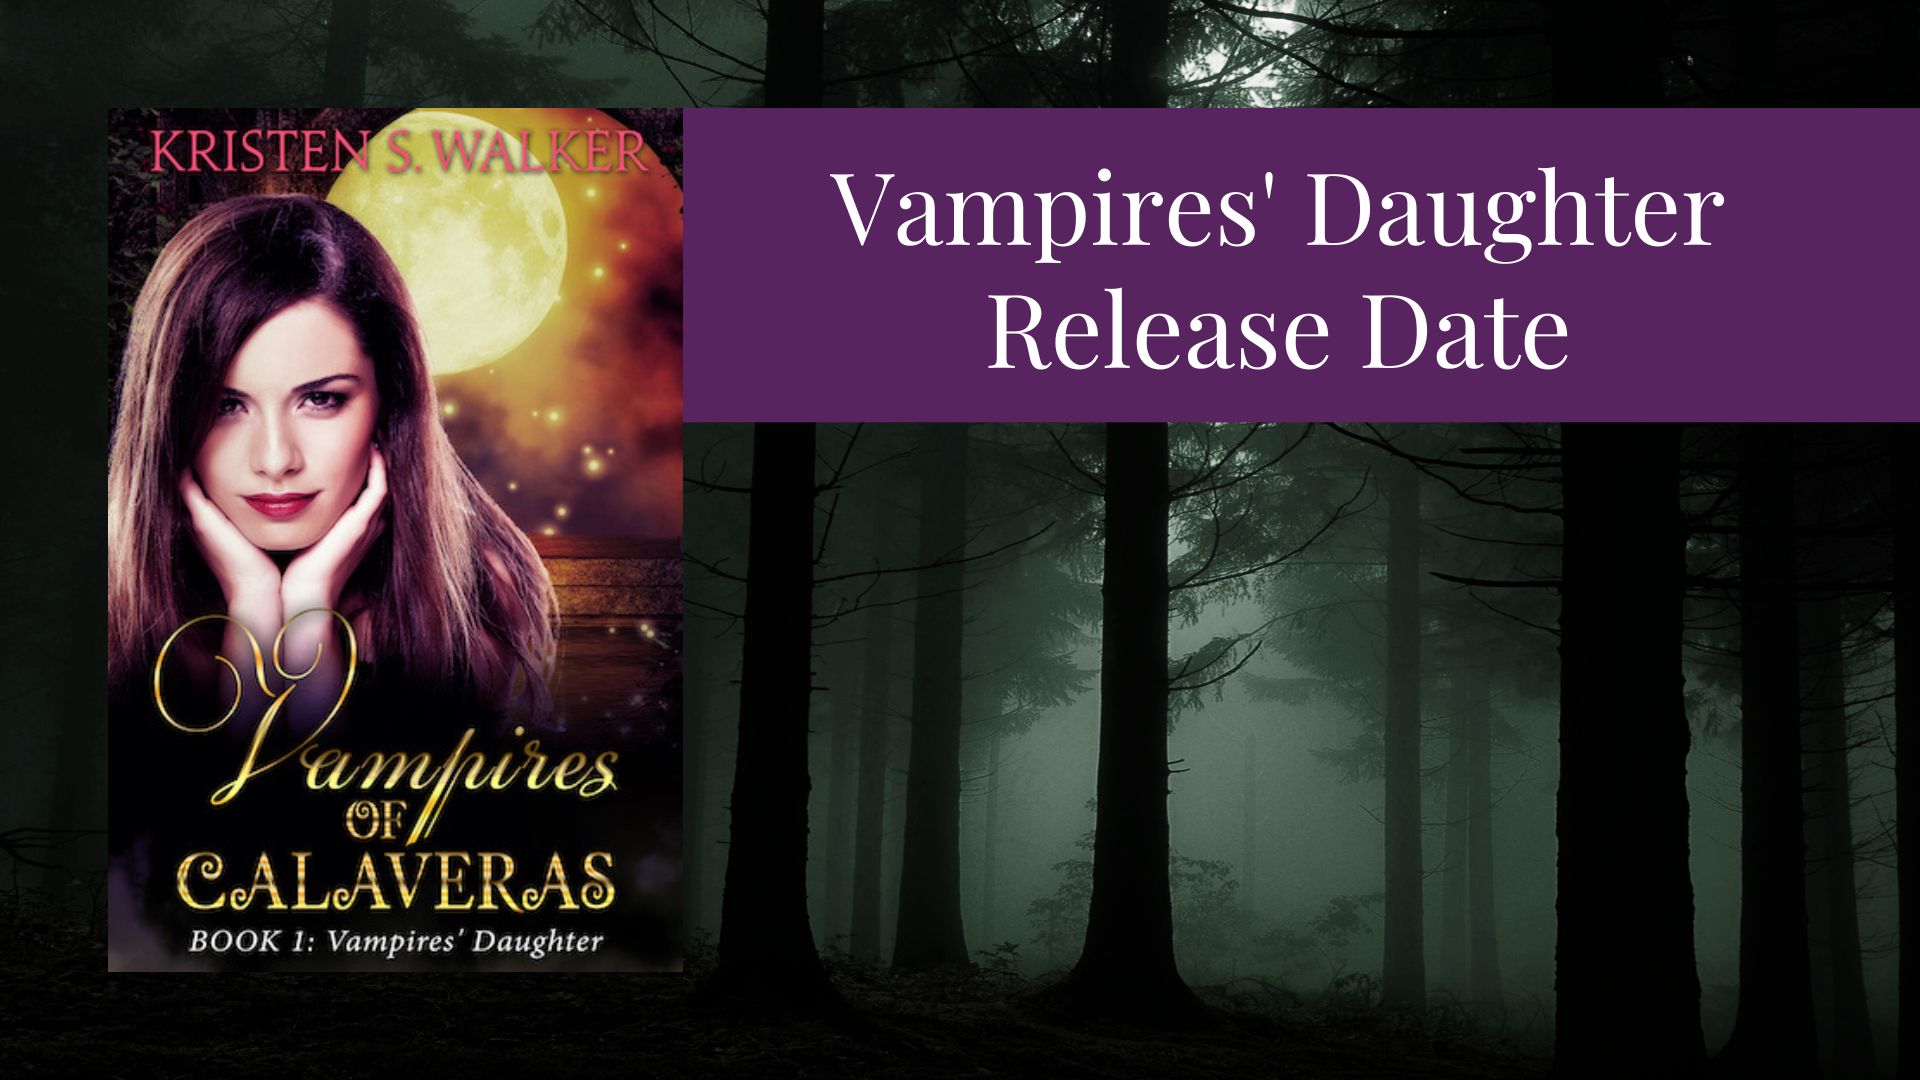 You are currently viewing Vampires’ Daughter Release Date